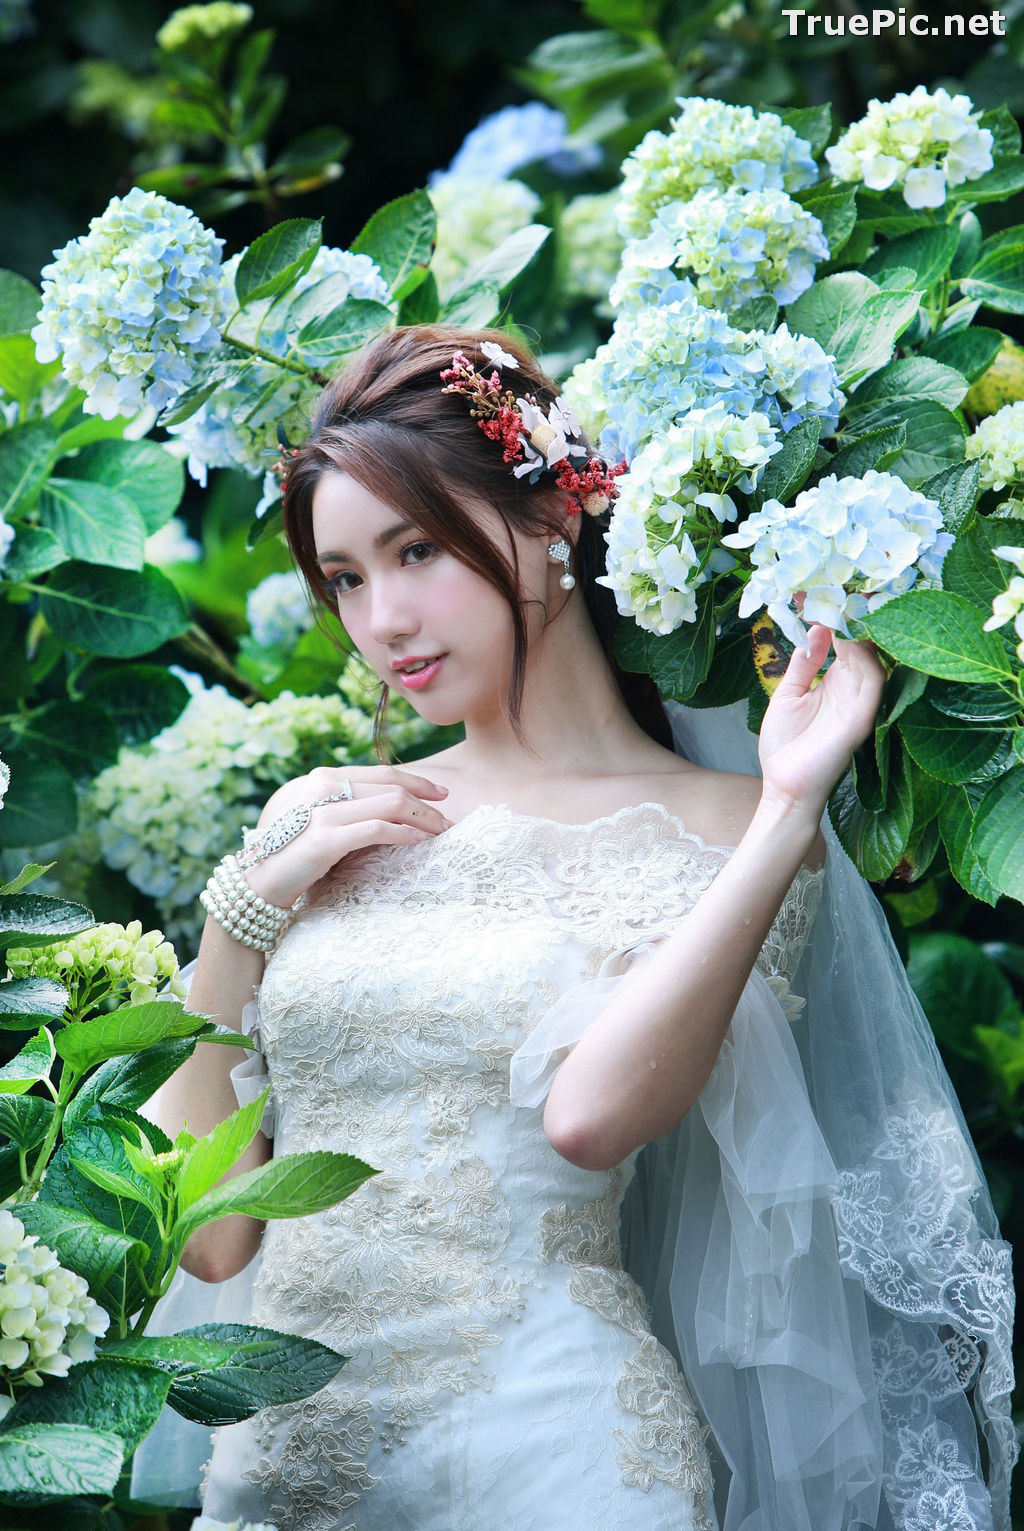 Image Taiwanese Model - 張倫甄 - Beautiful Bride and Hydrangea Flowers - TruePic.net - Picture-48